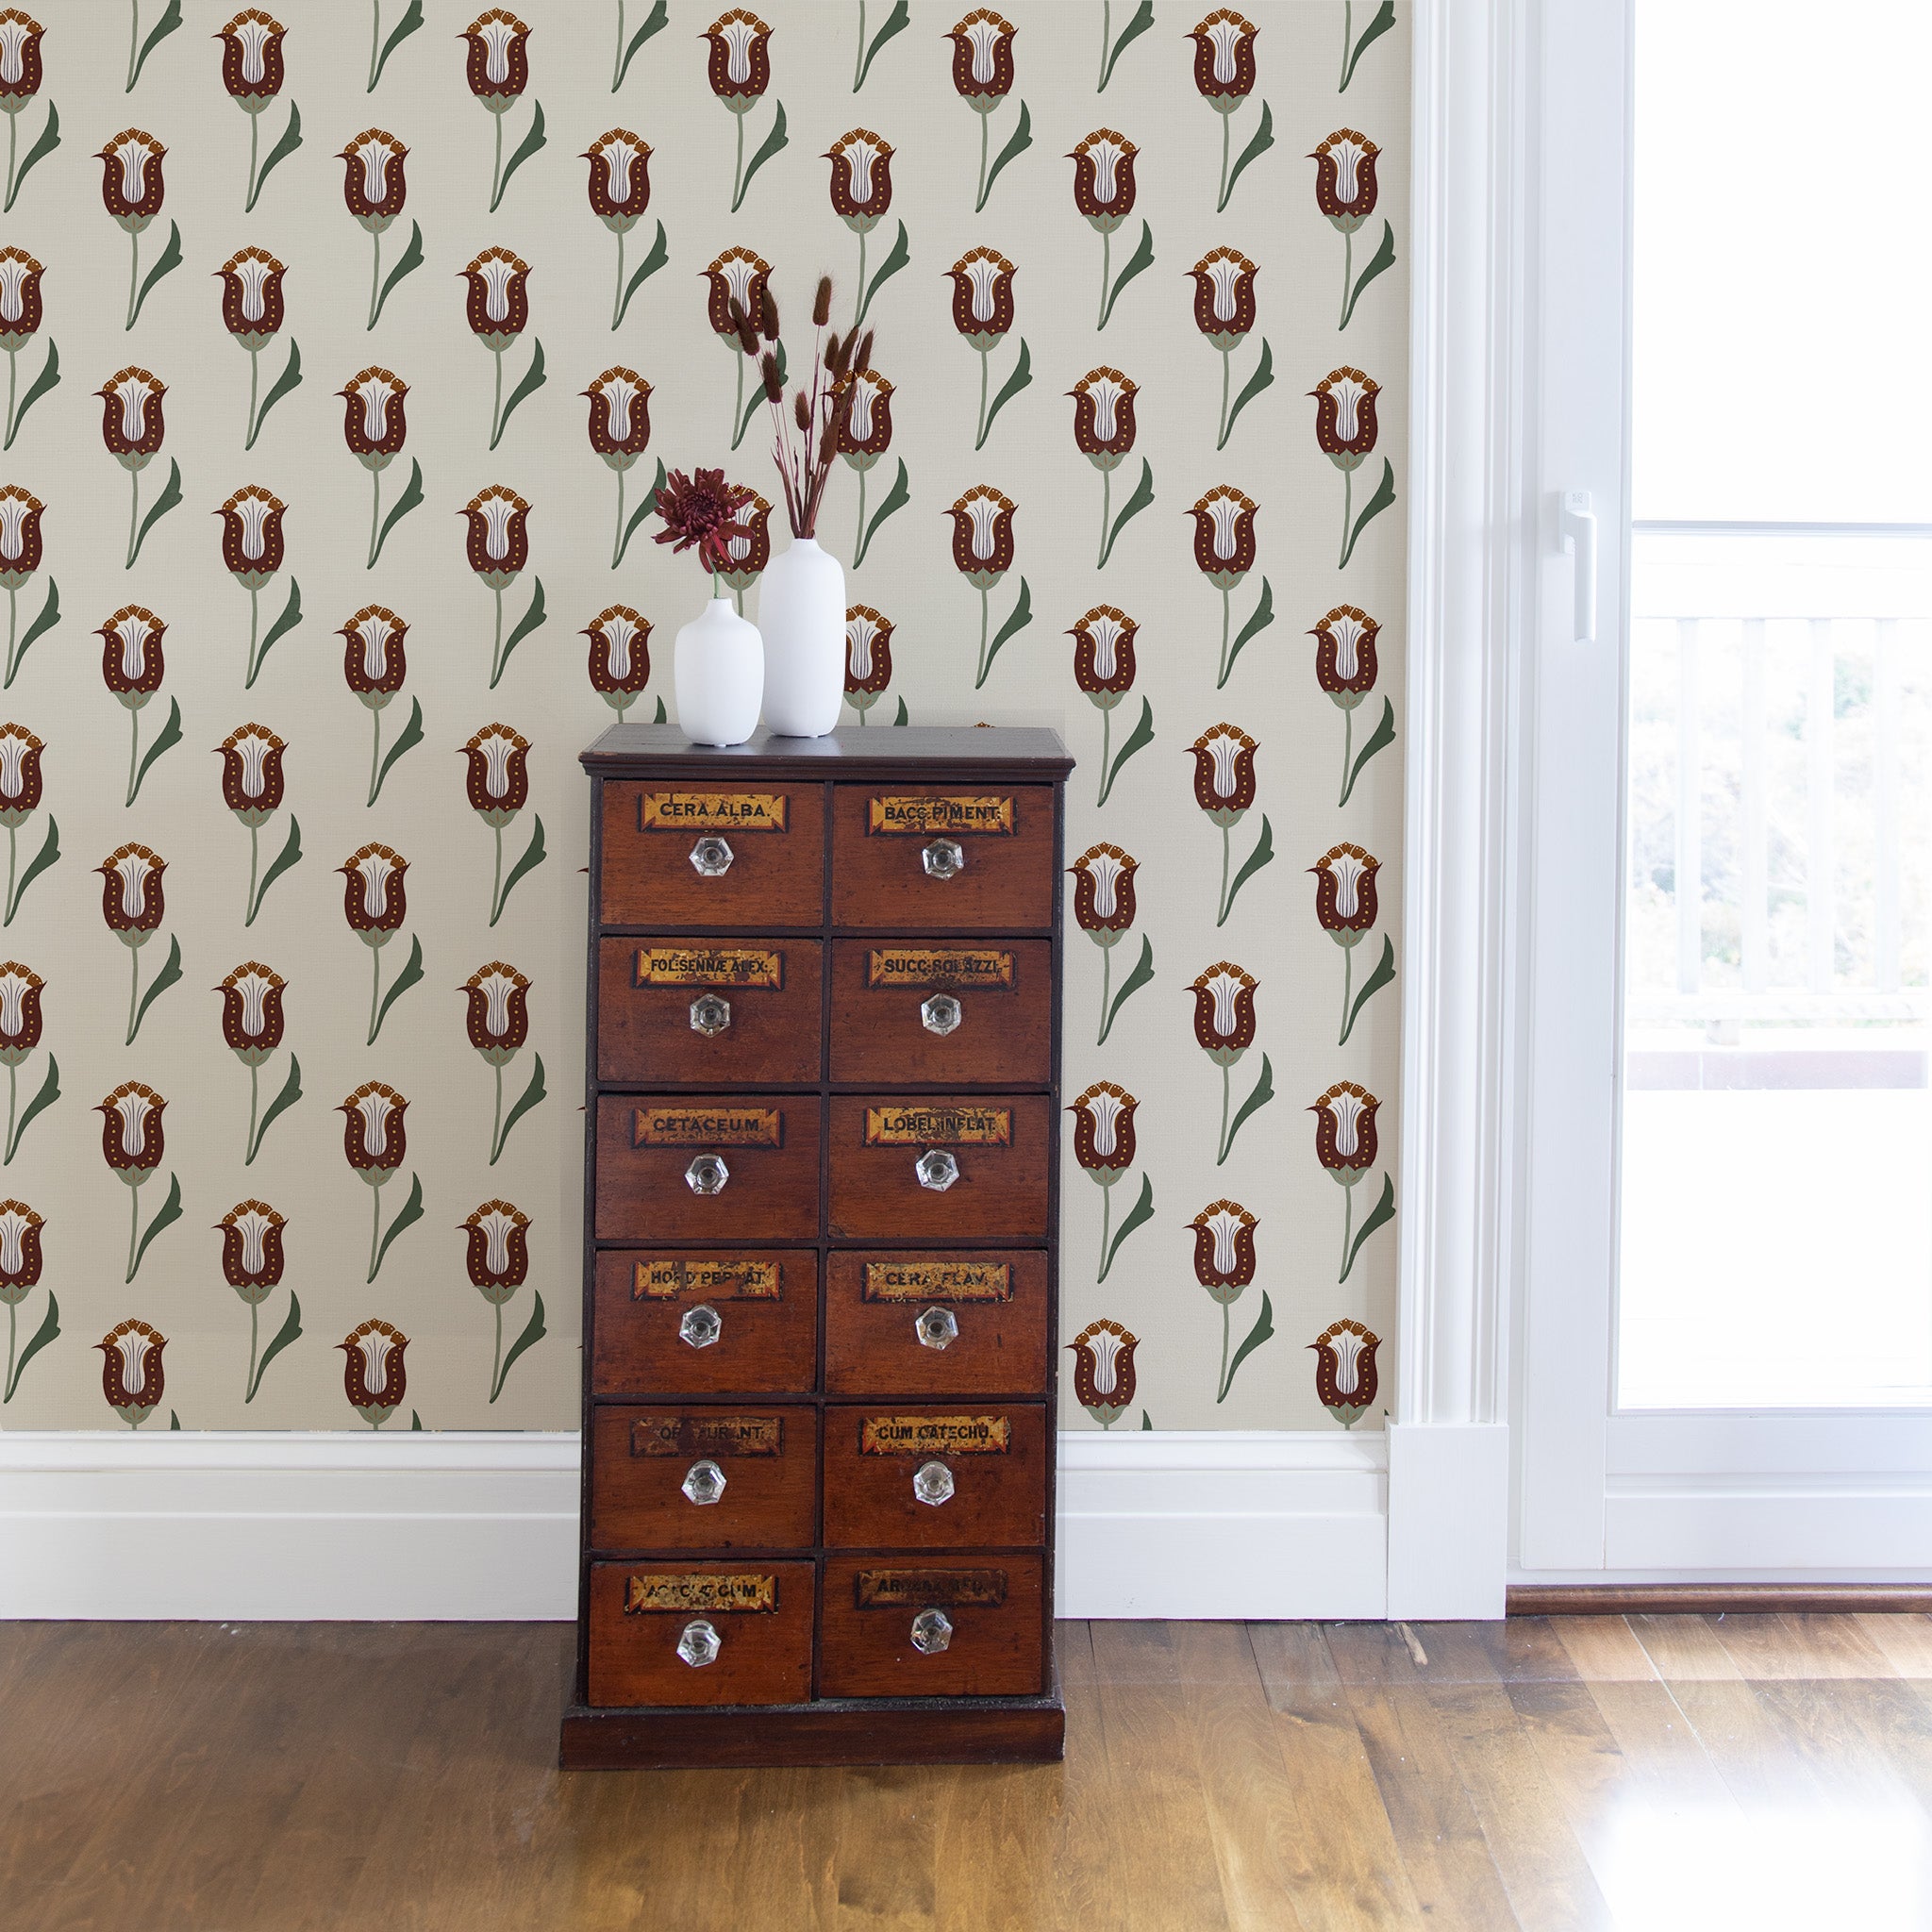 abstract floral maroon and forest green wallpaper on a wall with a brown cabinet in front with vases with flowers on top